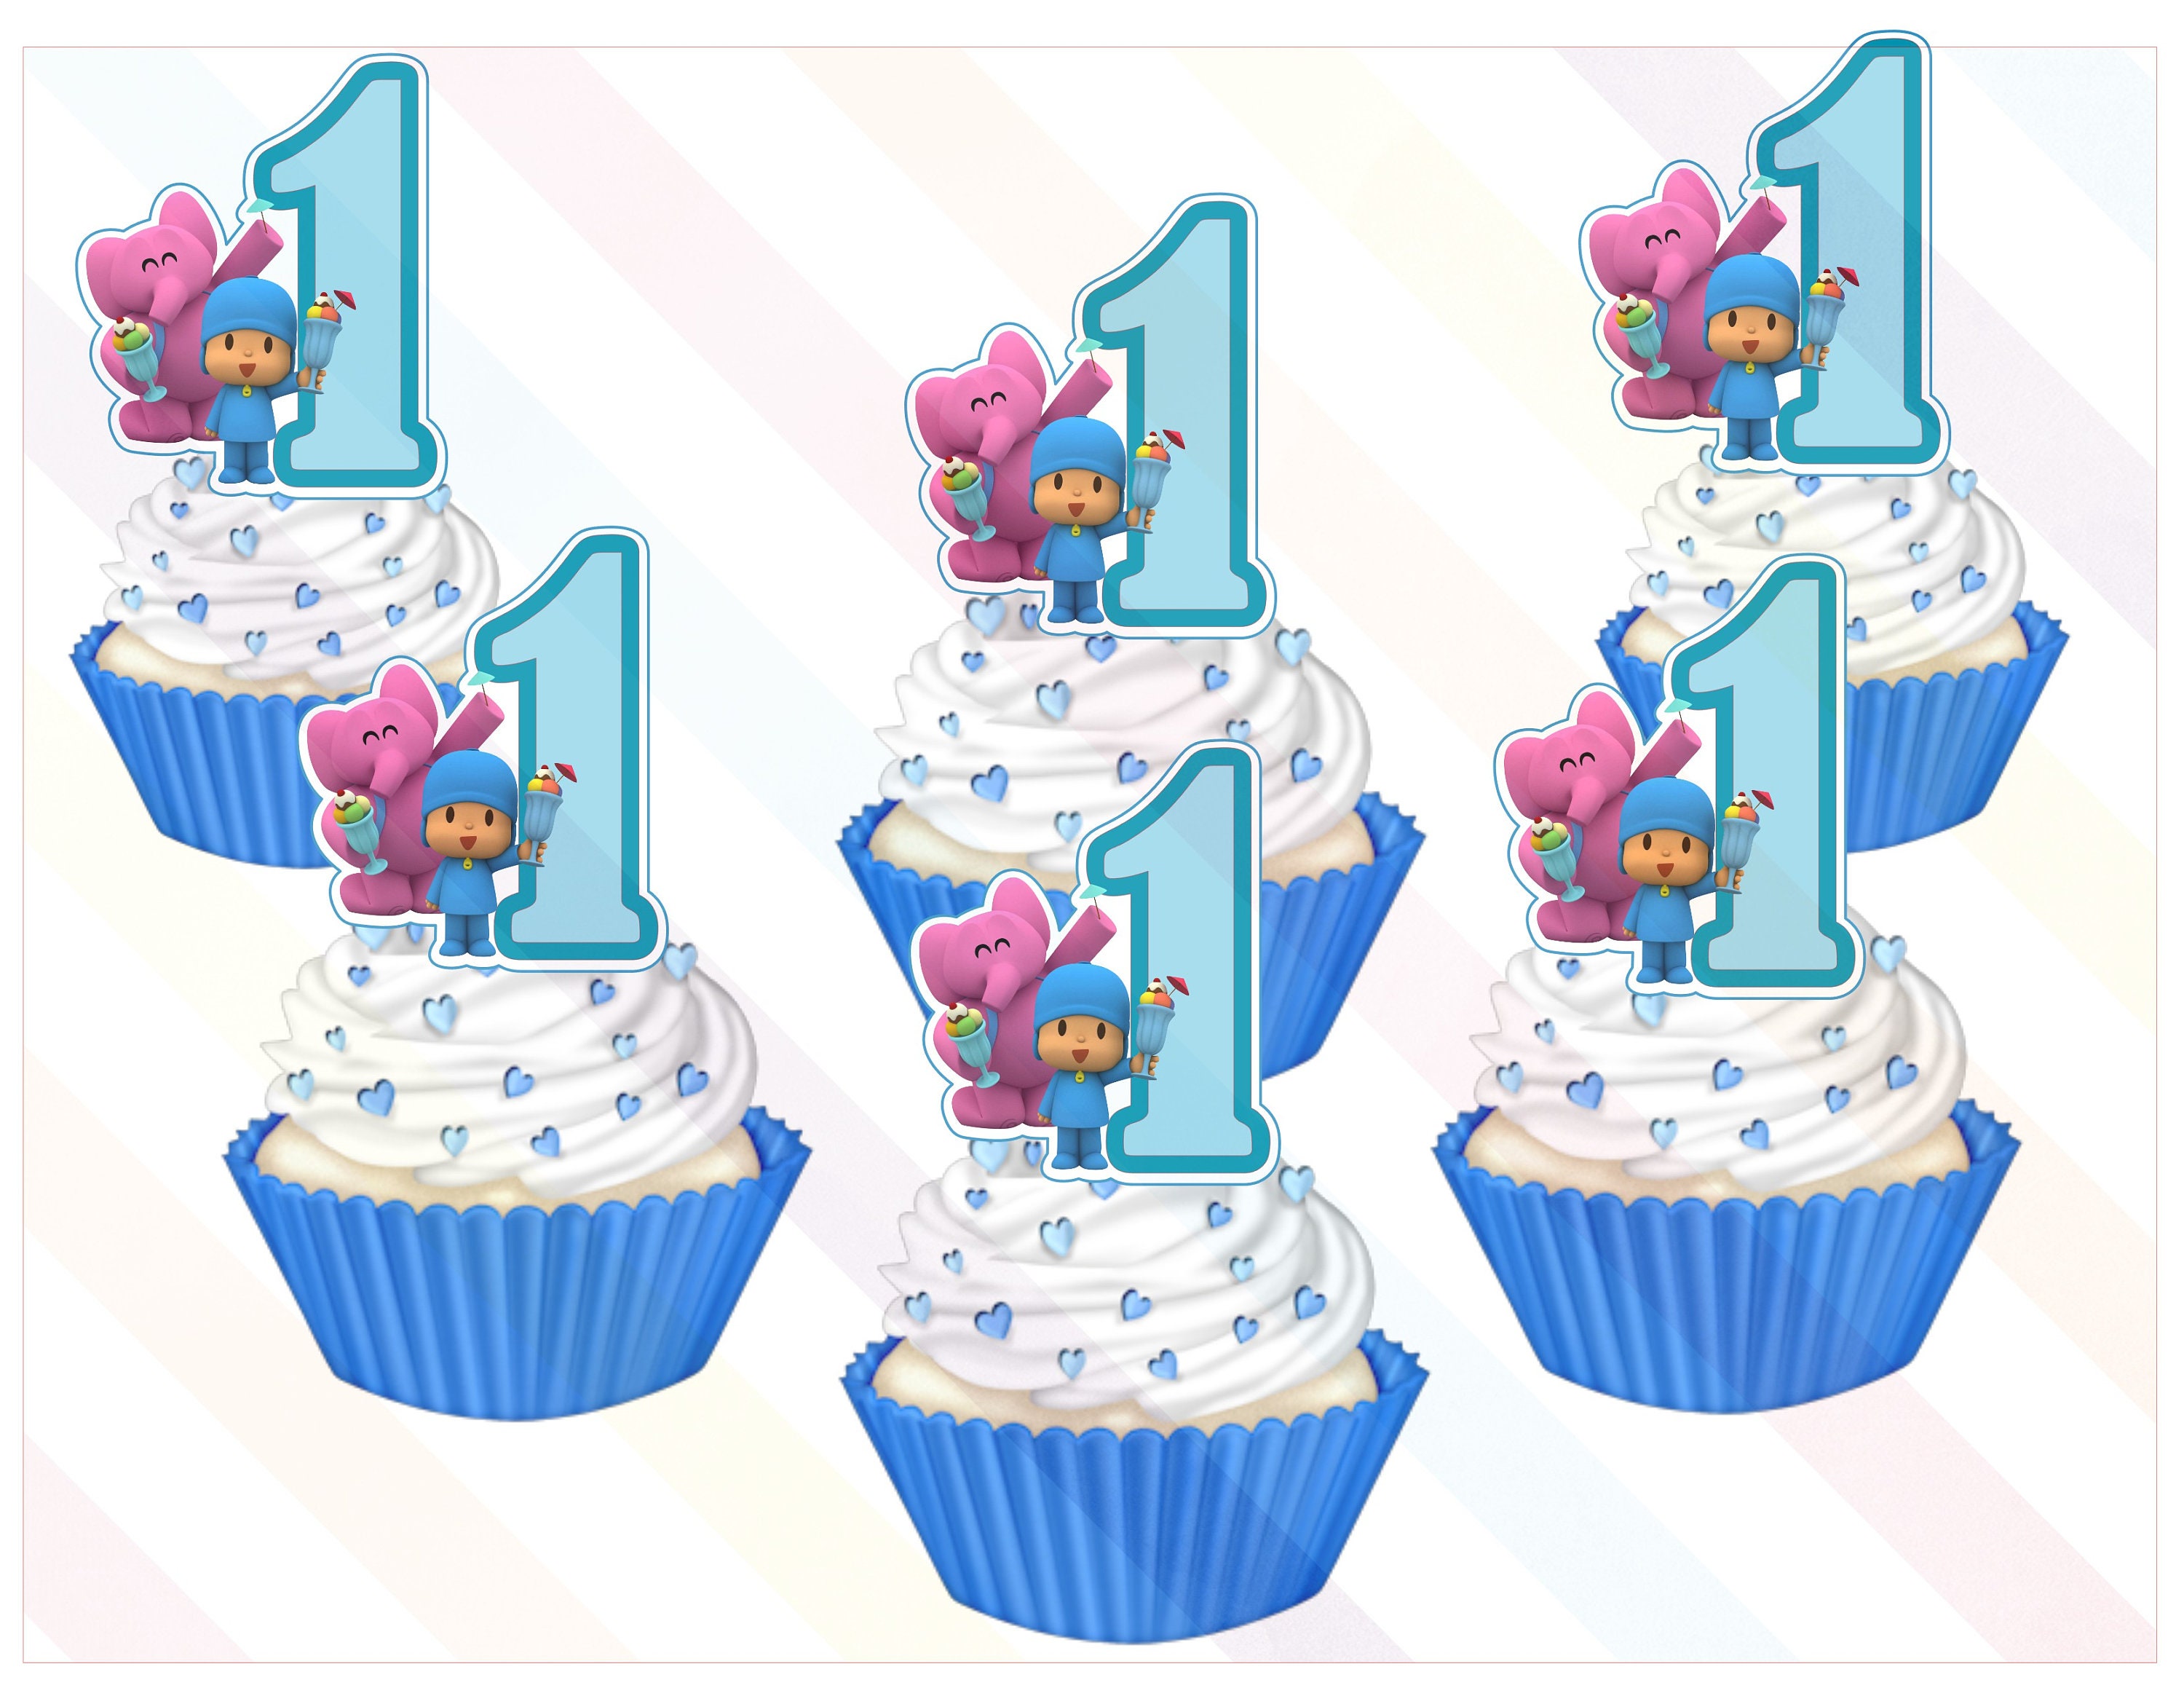 pocoyo-cake-topper-printable-purchase-cheapest-www-echotechpoint